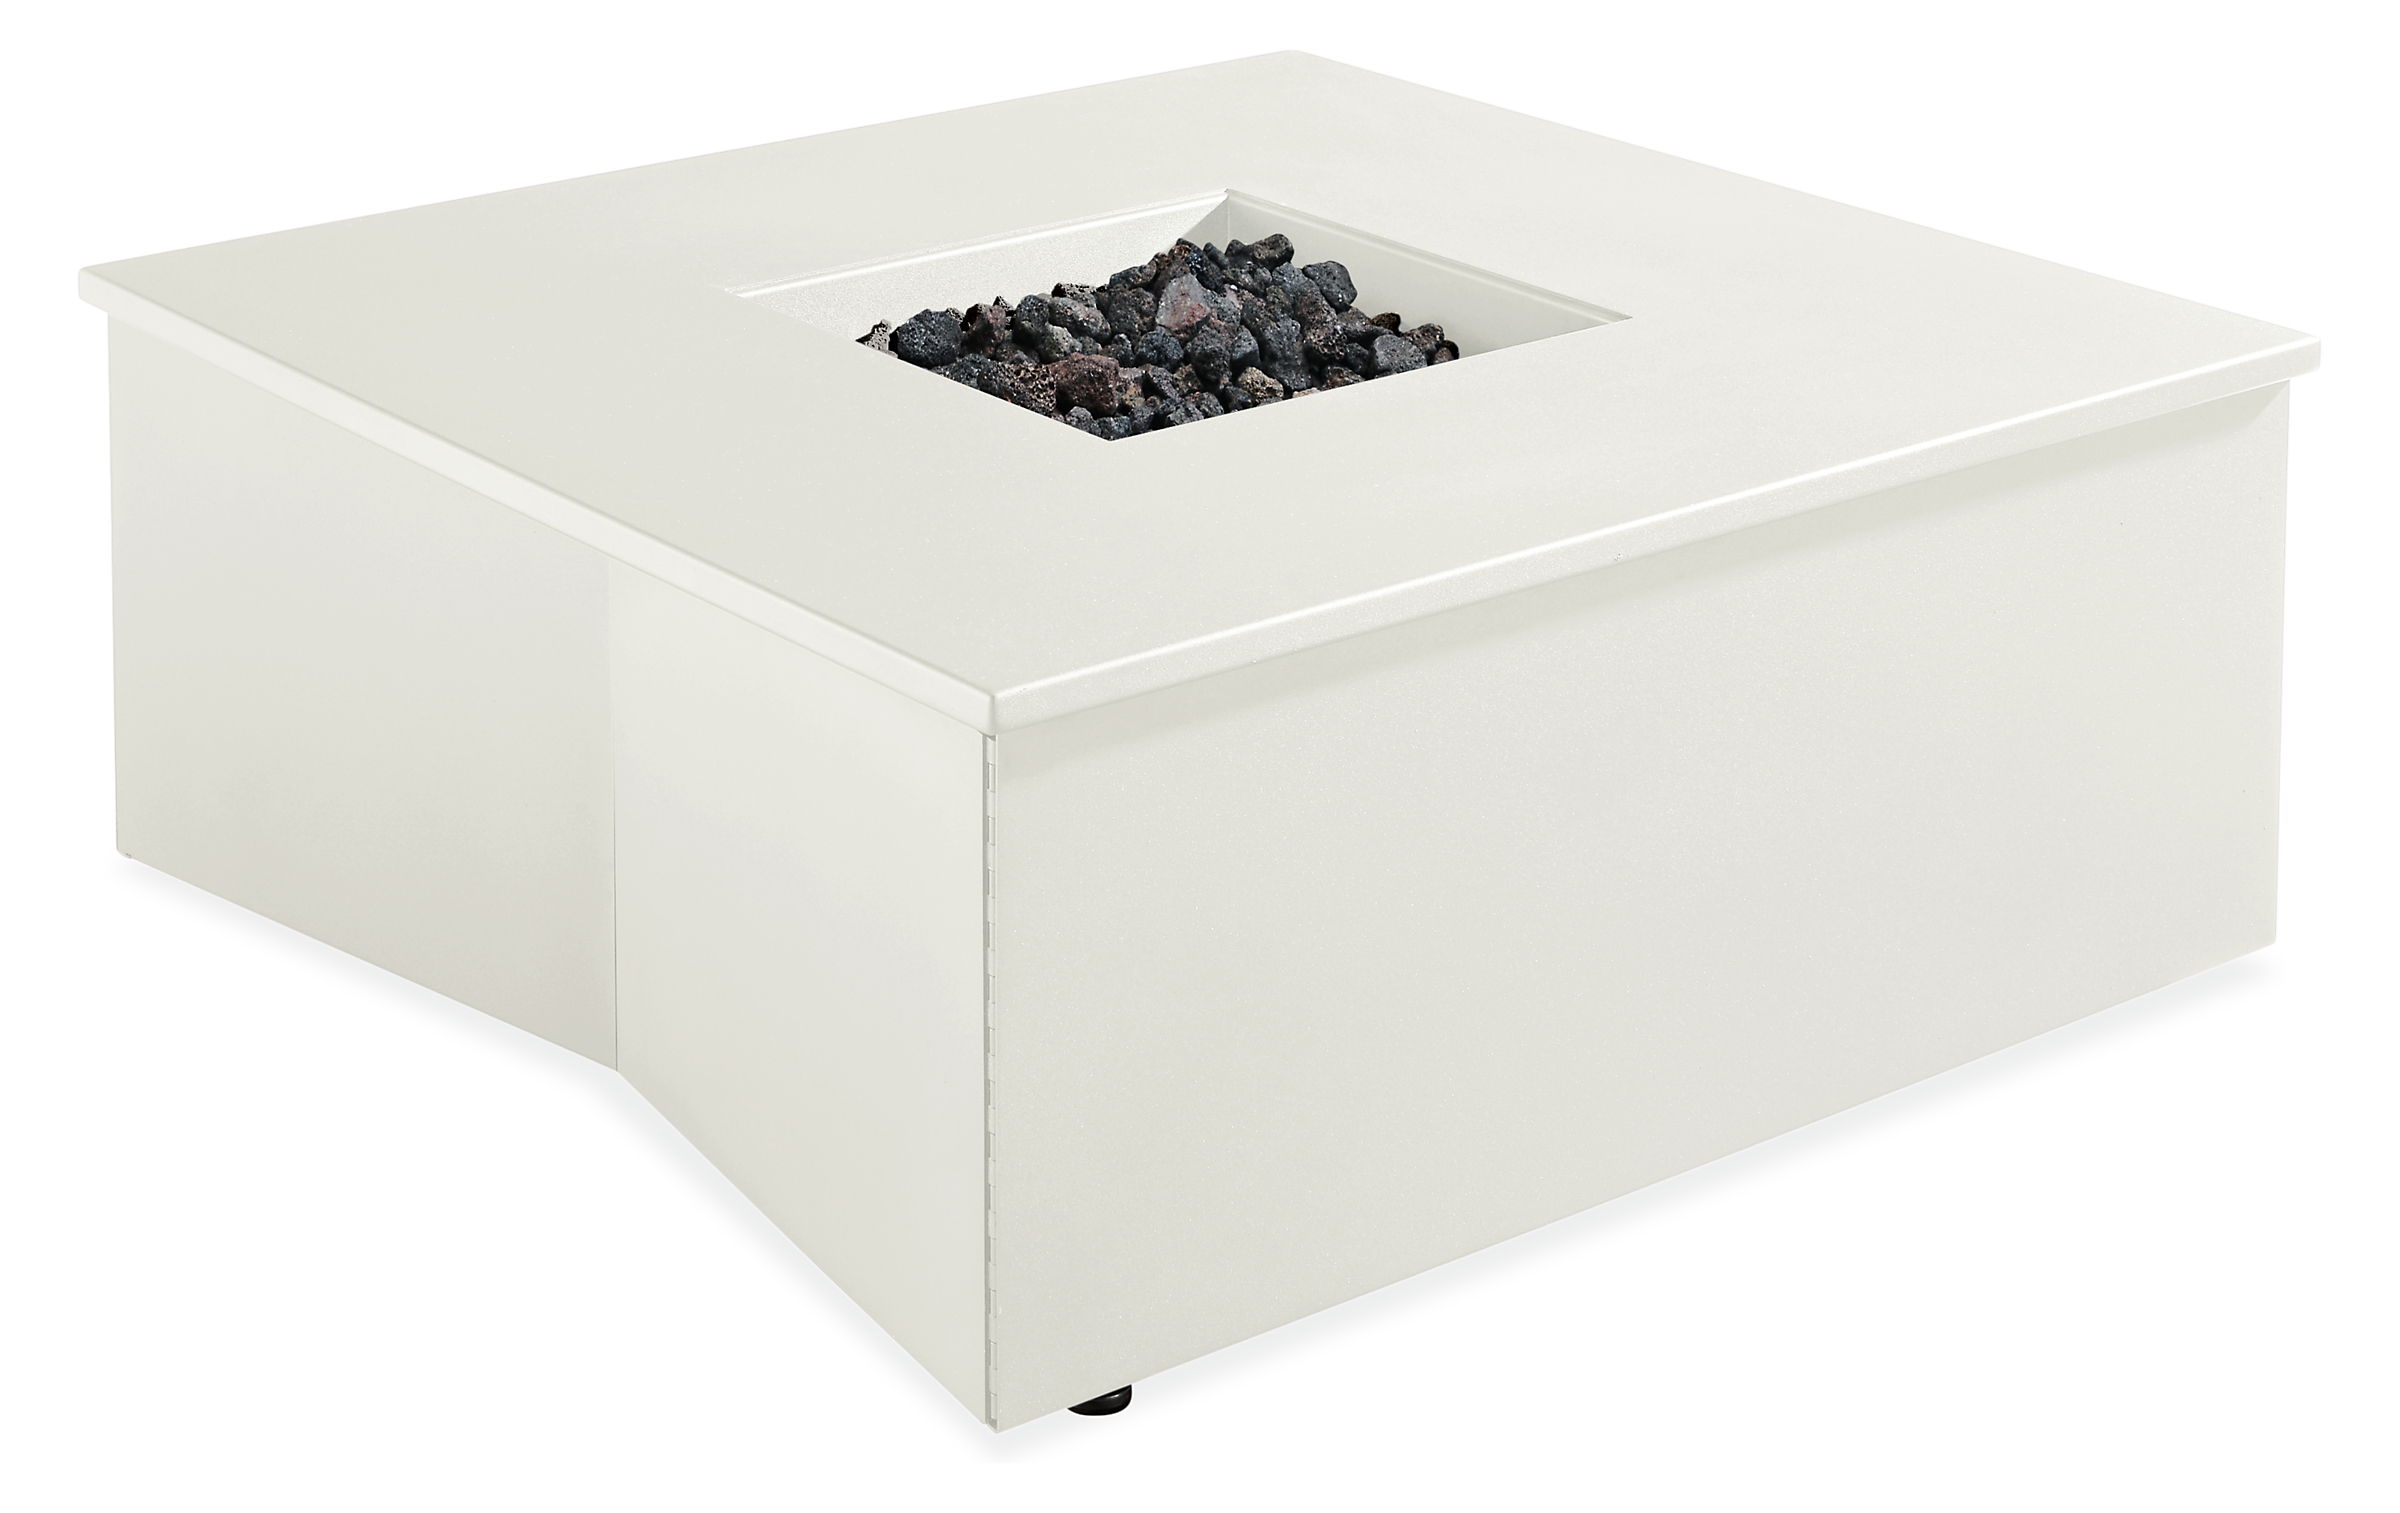 Adara 37w 37d 15h Outdoor Fire Table with Natural Gas Hook-Up in White